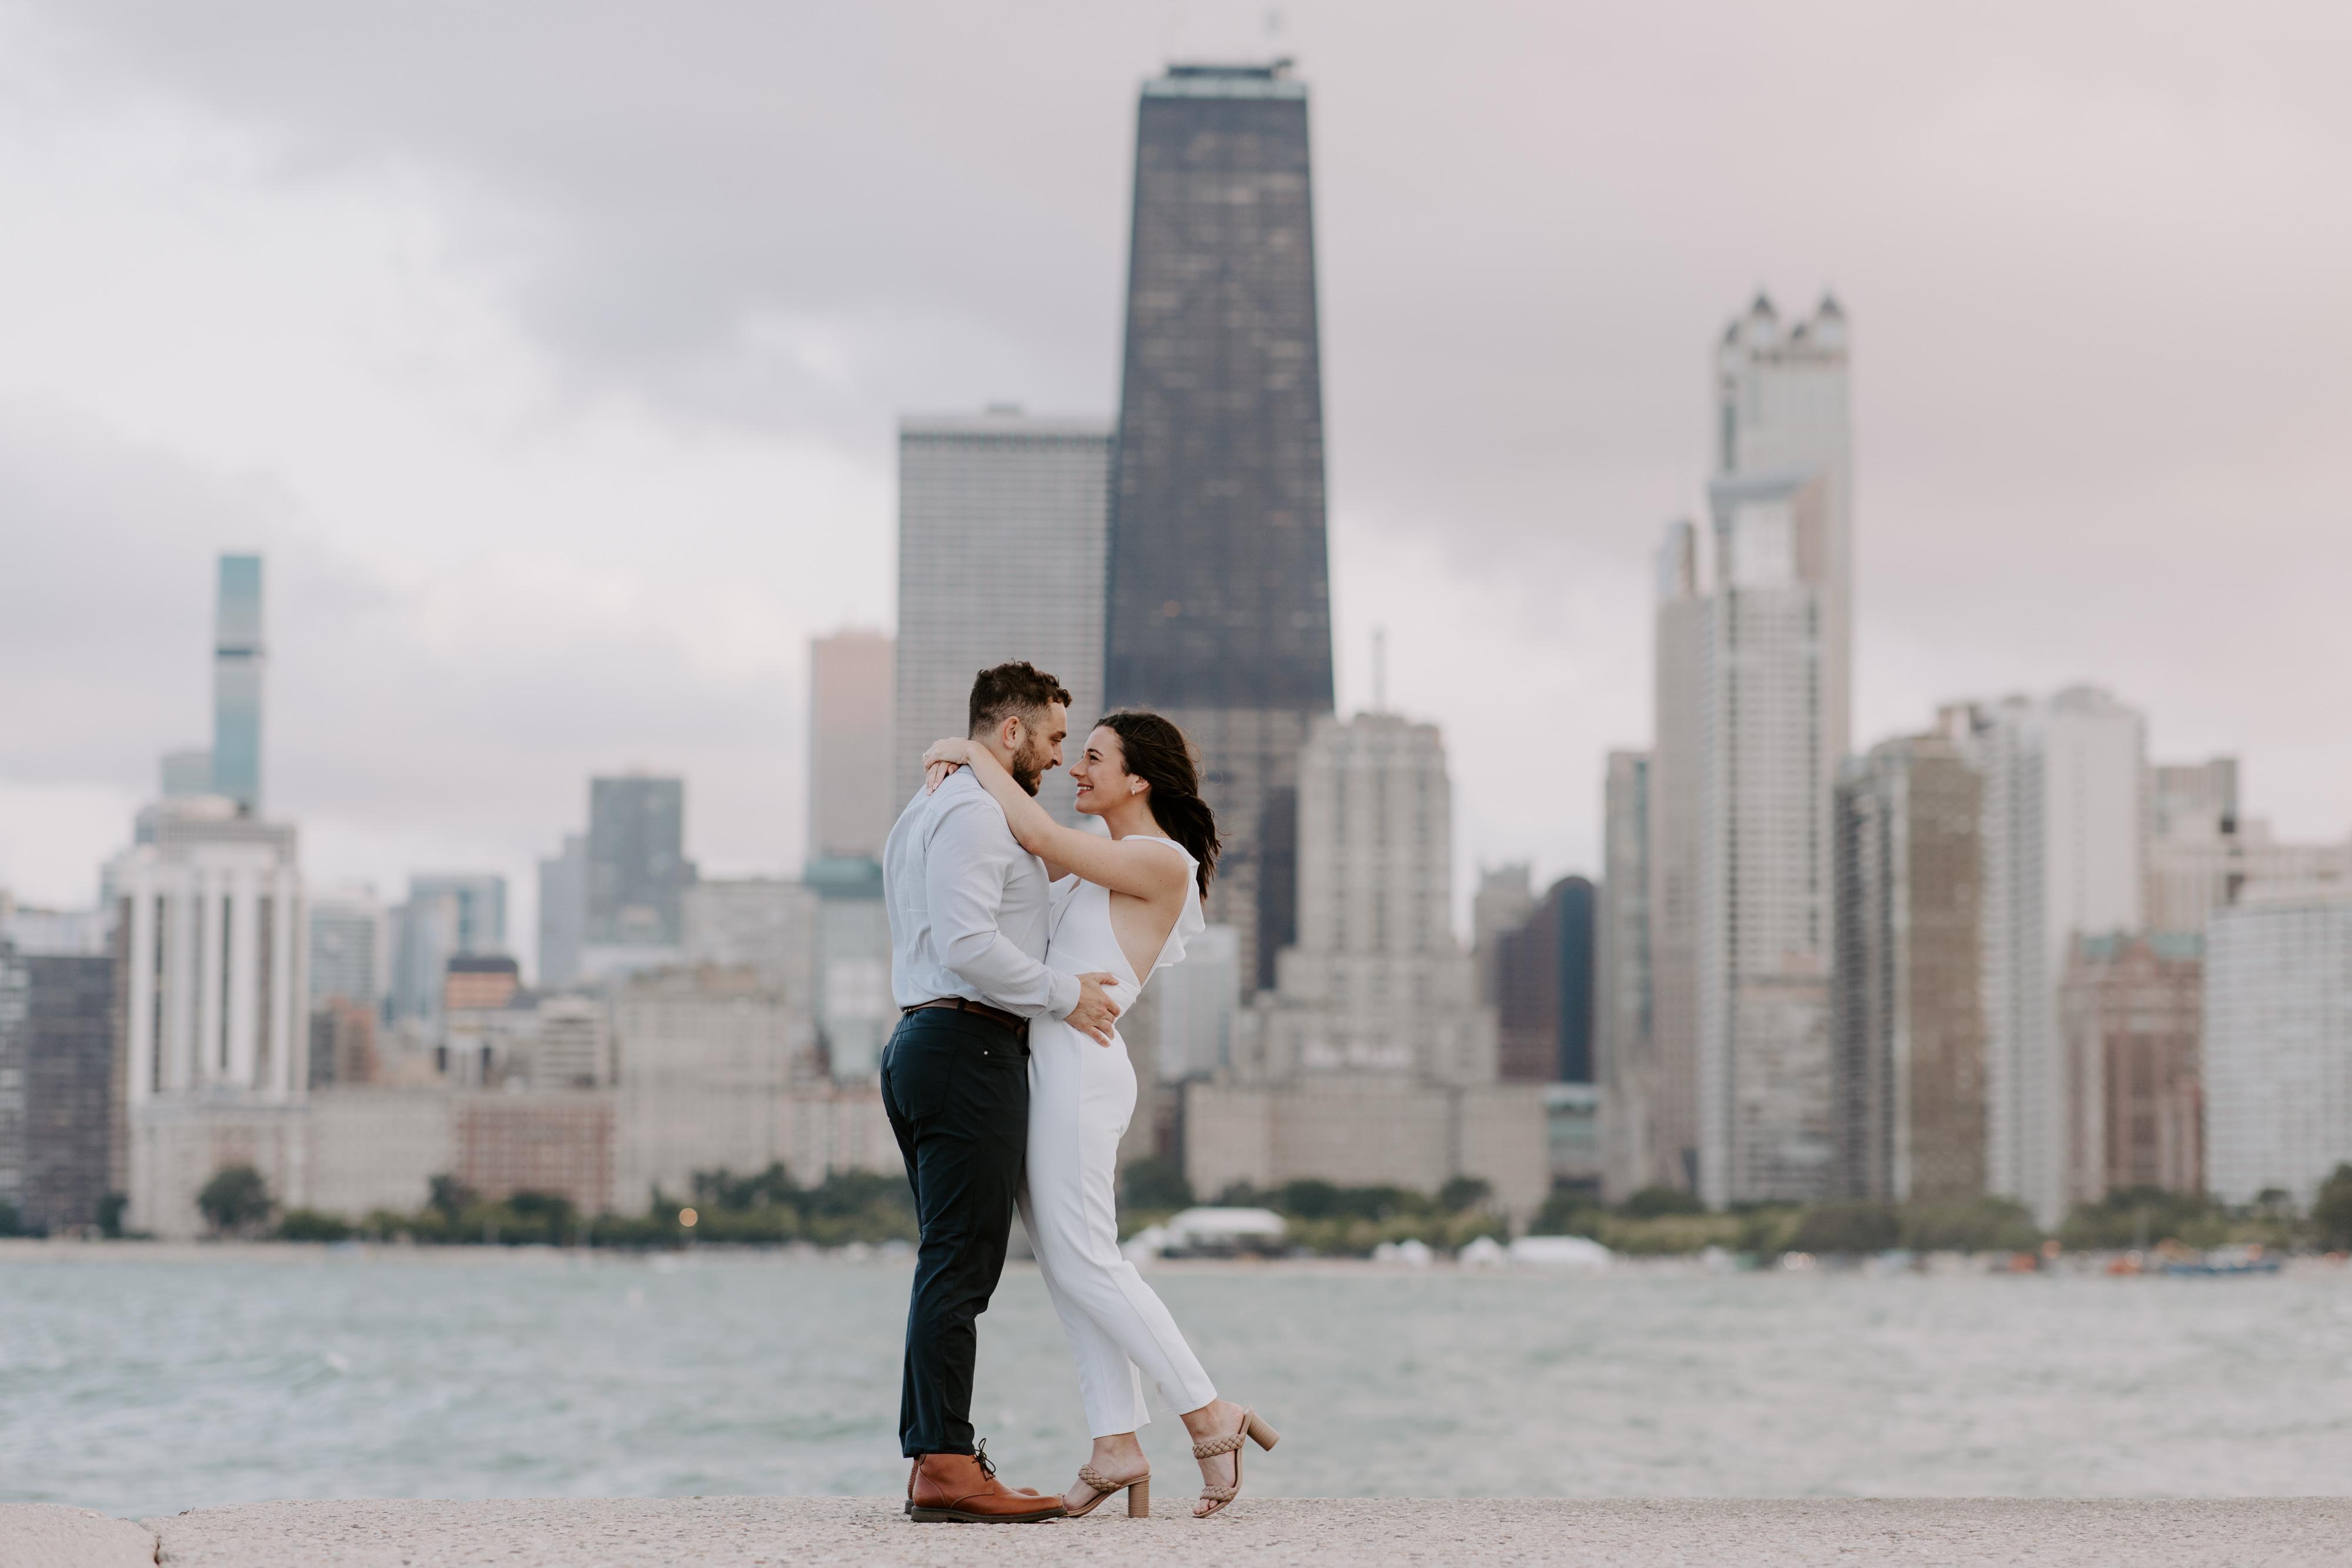 The Wedding Website of Emily Diehl and Nicholas Carsello